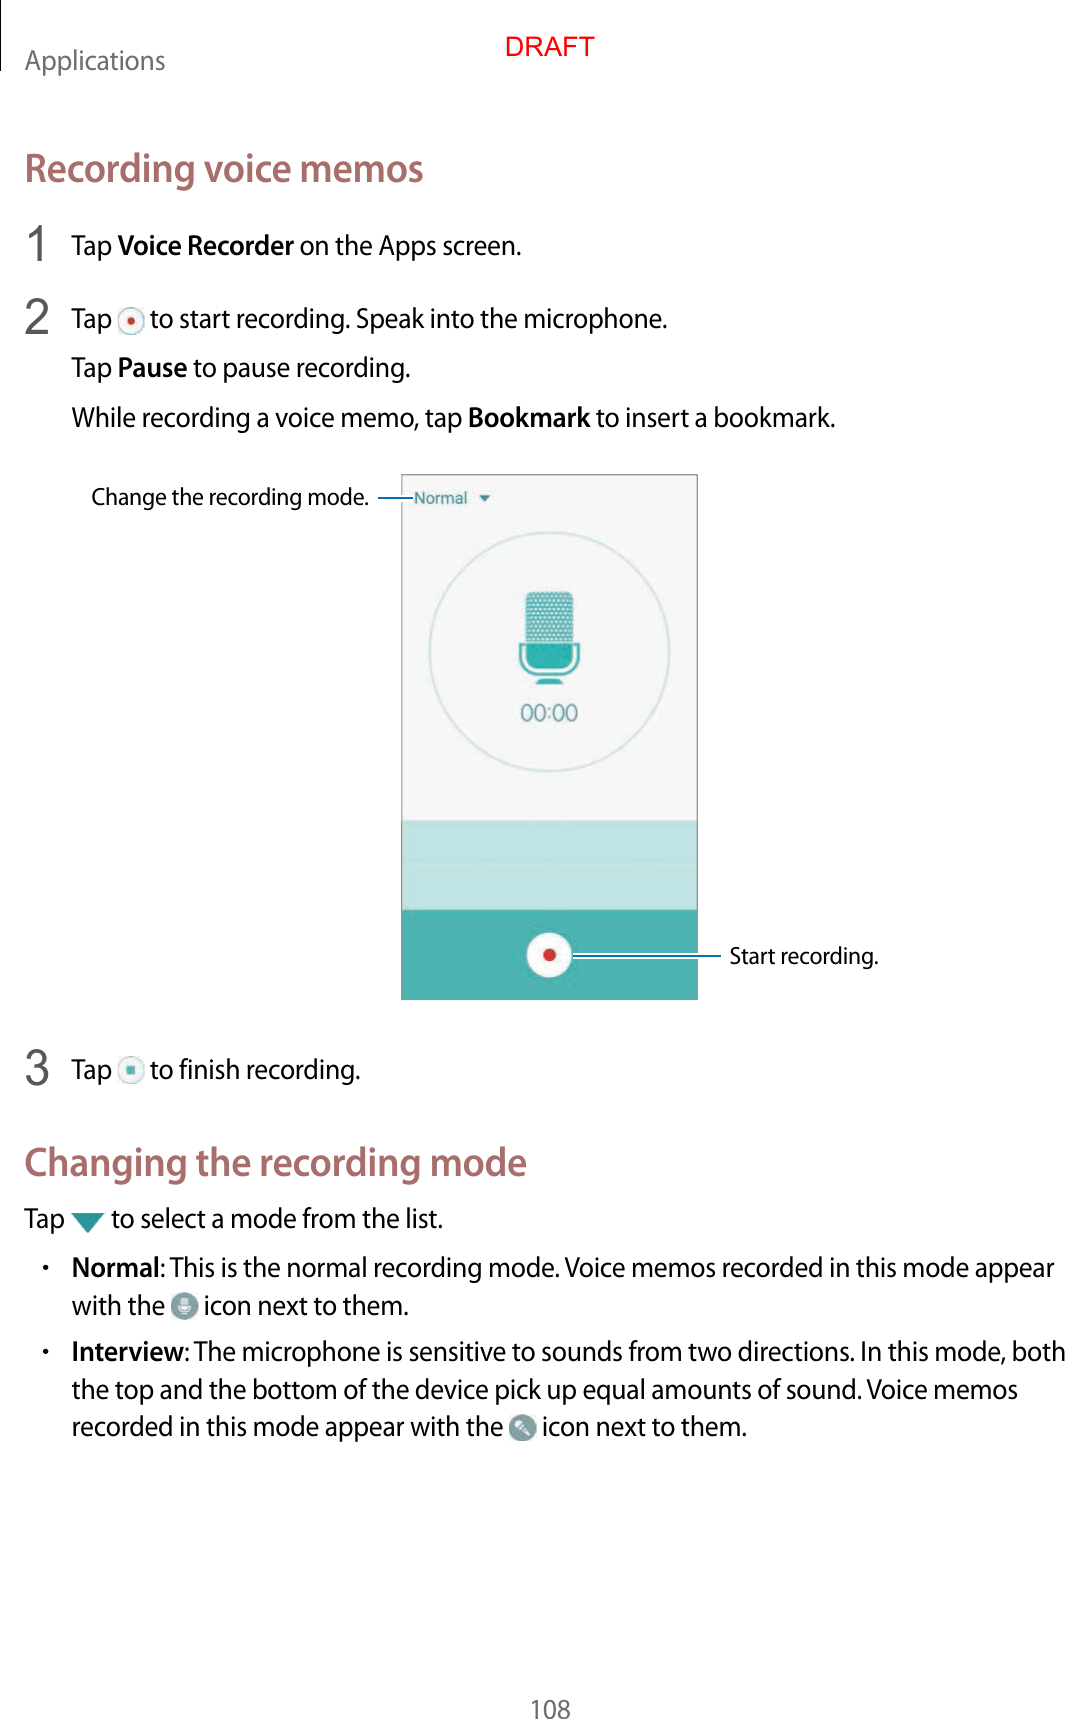 Applications108Recor ding v oic e memos1  Tap Voice Recor der on the Apps screen.2  Tap   to start recor ding . Speak in to the micr ophone .Tap Pause to pause rec or ding .While rec or ding a v oice memo, tap Bookmark to insert a bookmark.Change the recor ding mode .Start rec or ding .3  Tap   to finish recor ding .Changing the r ec or ding modeTap   to select a mode from the list.•Normal: This is the normal rec or ding mode . Voice memos r ecor ded in this mode appear with the   icon next to them.•Interview: The micr ophone is sensitiv e to sounds fr om two dir ections. In this mode, both the top and the bottom of the devic e pick up equal amounts of sound . Voice memos recor ded in this mode appear with the   icon next to them.DRAFT